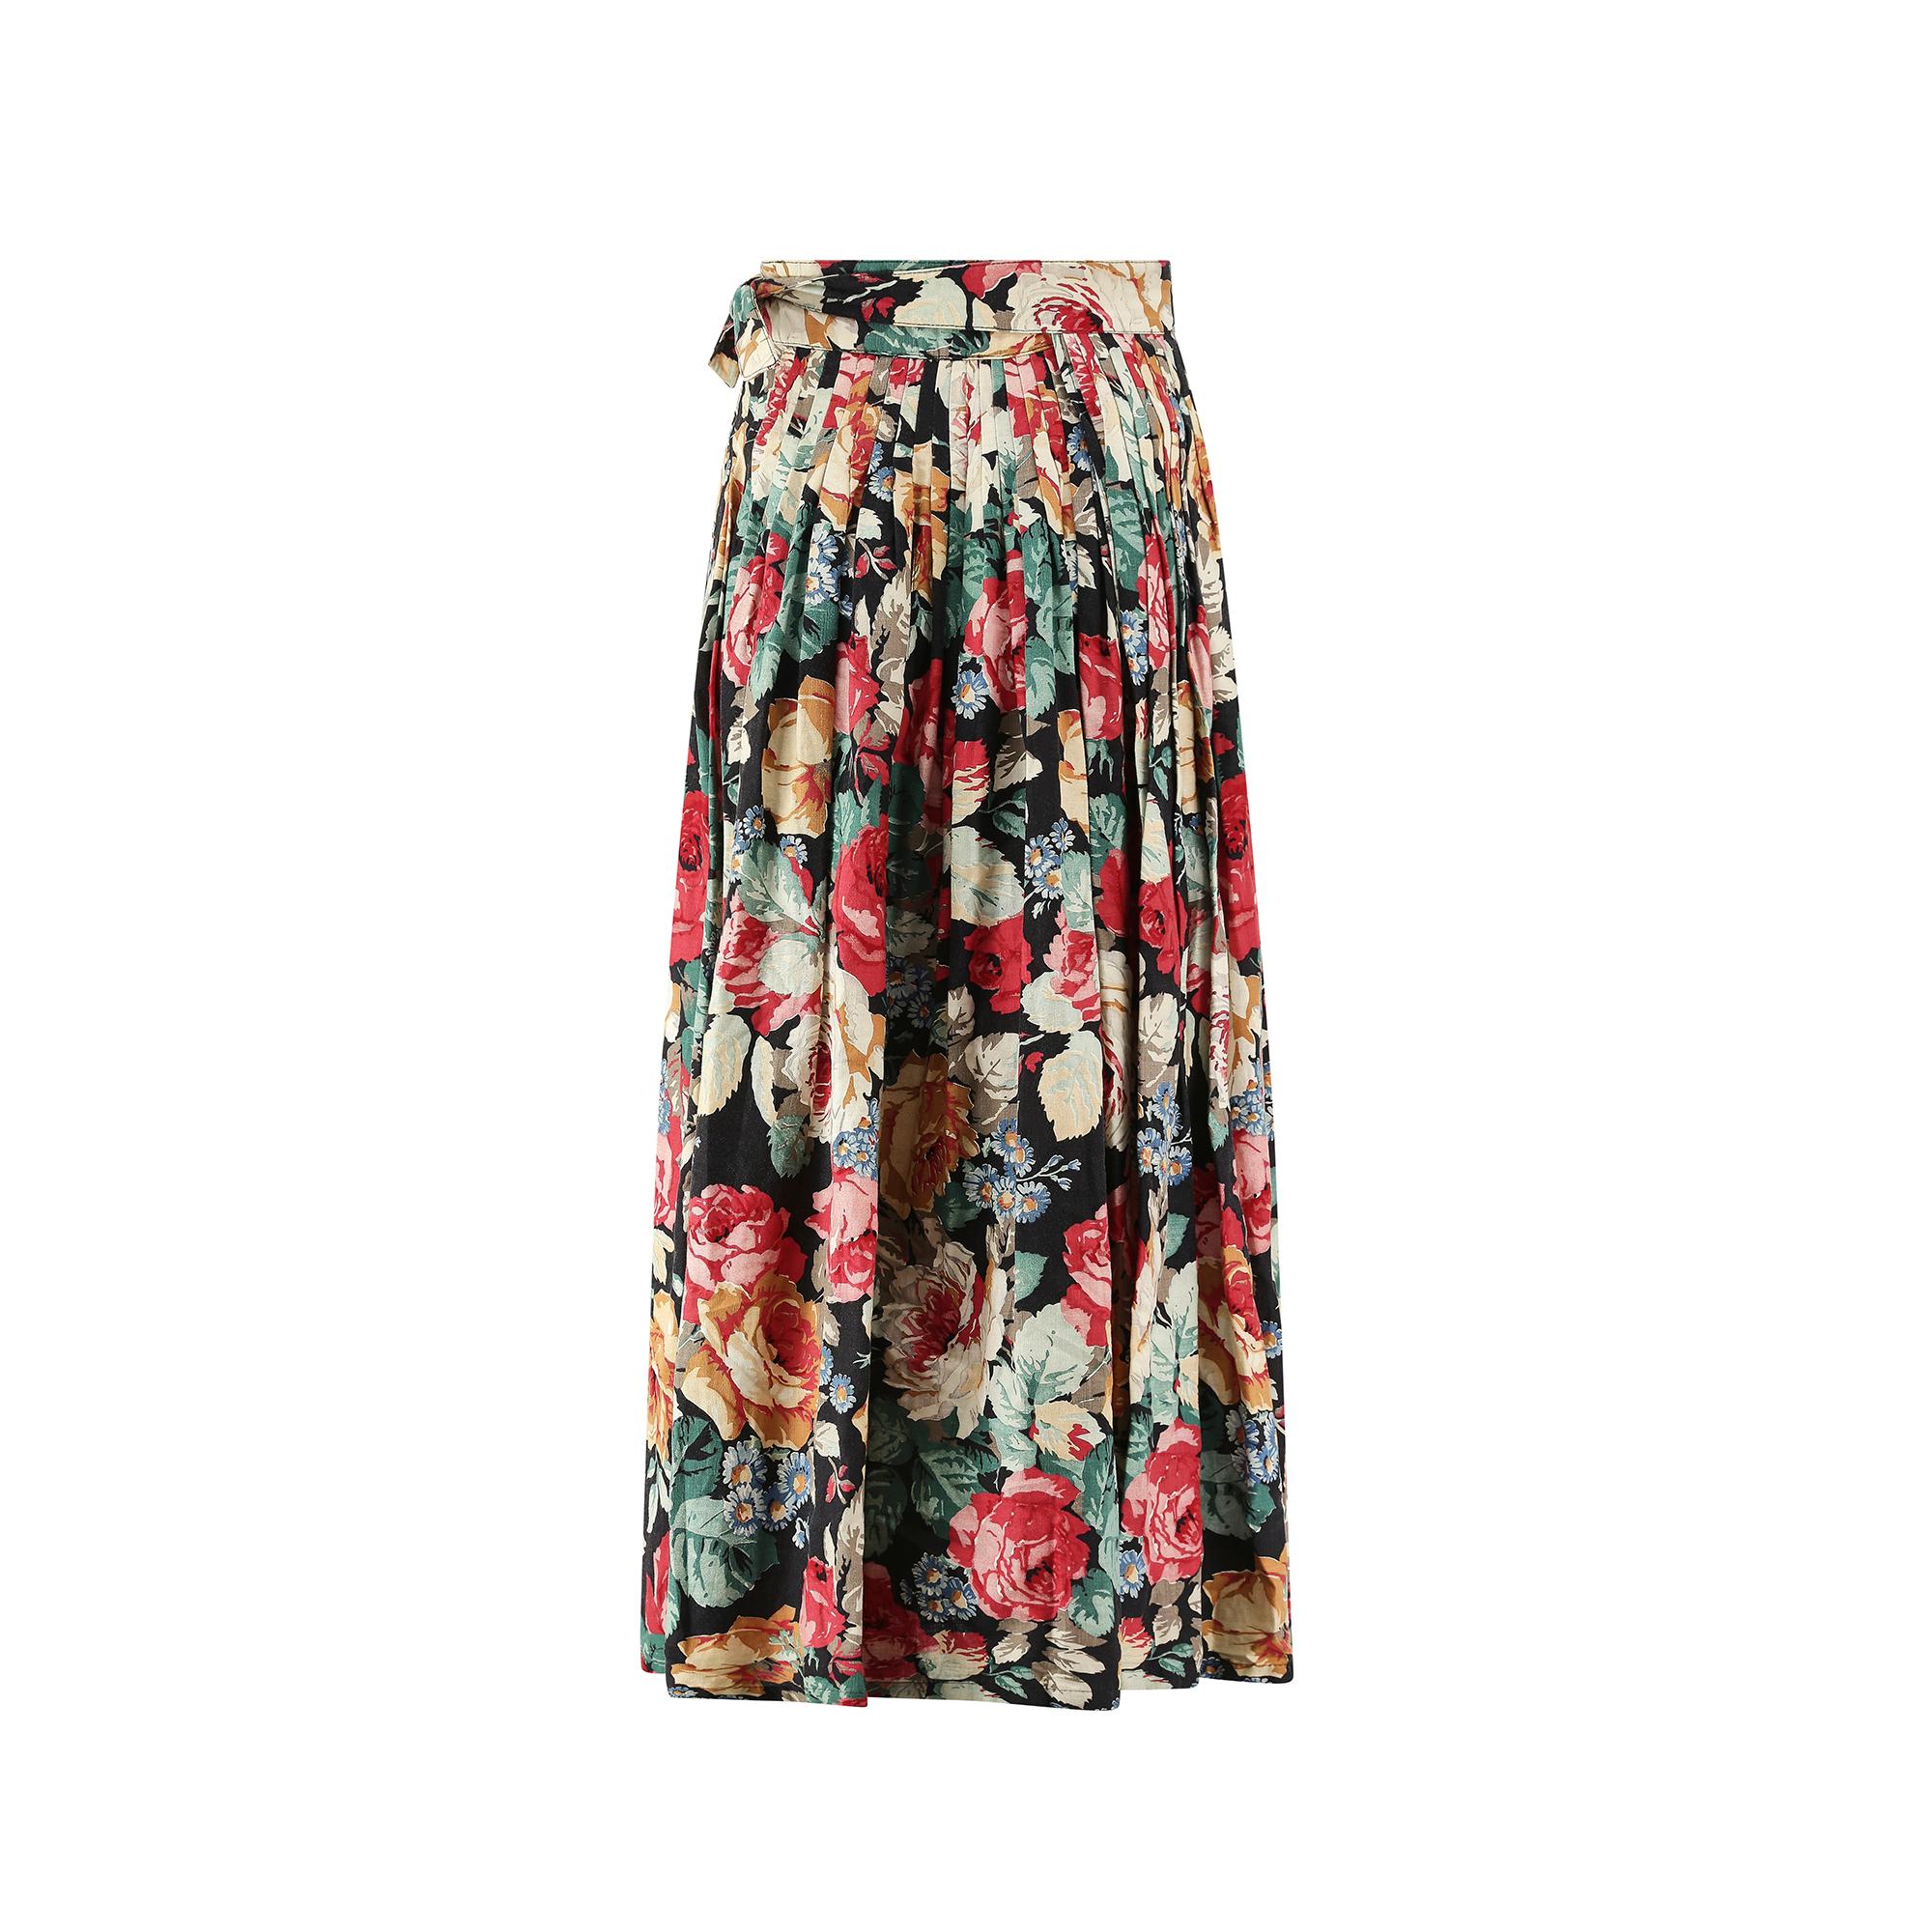 1980s Christian Aujard Floral Cotton Country Print Skirt In Excellent Condition For Sale In London, GB